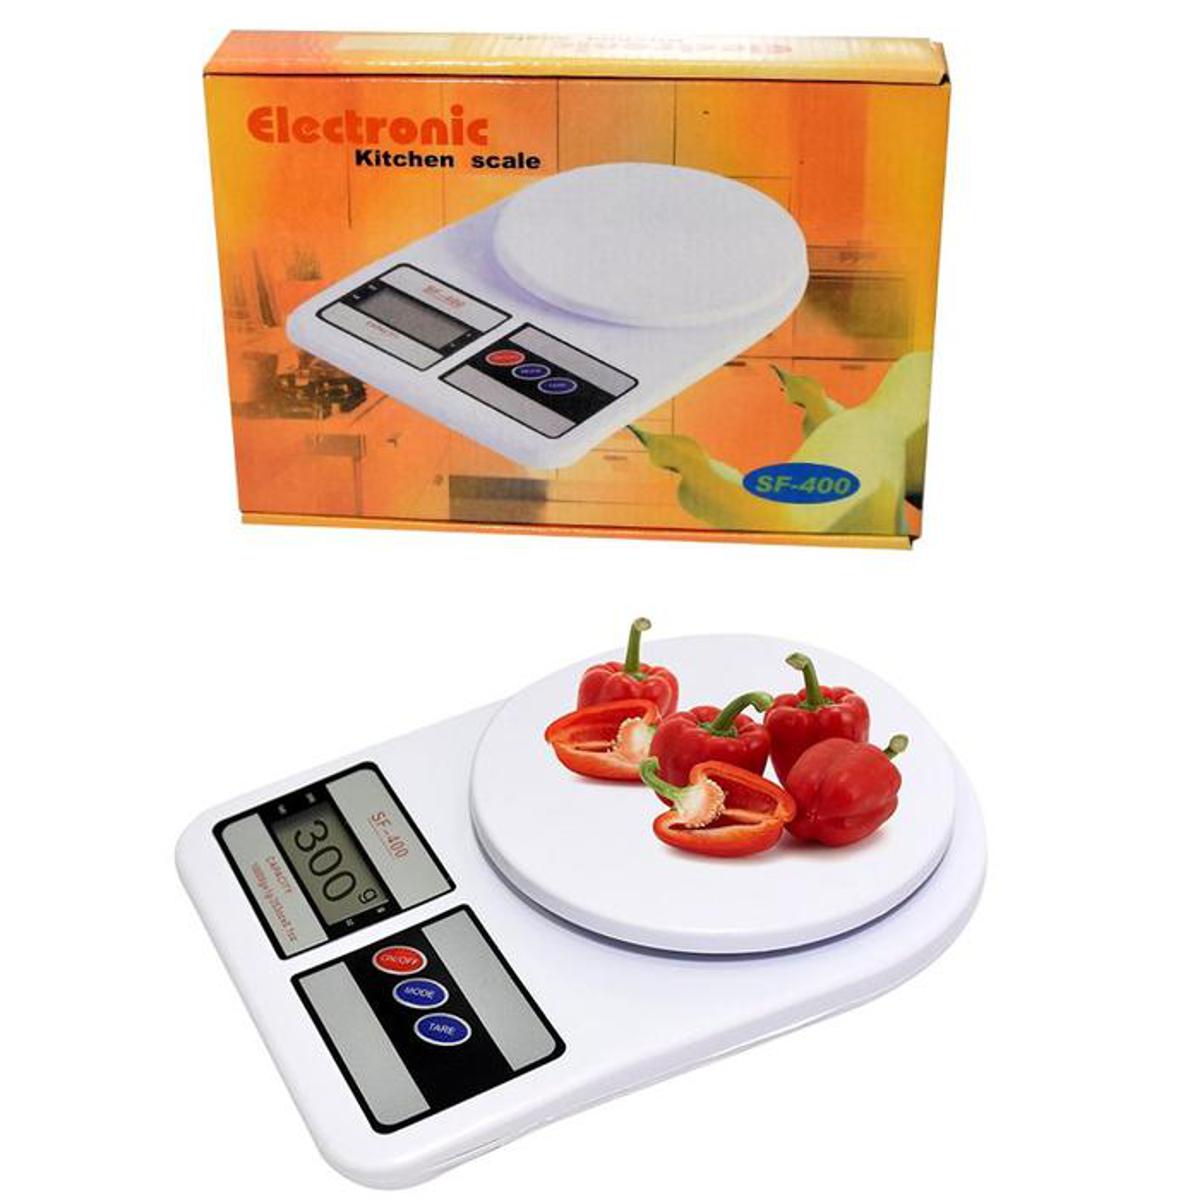 10 kg Weight Capacity Imported Electronic Digital Kitchen Scale